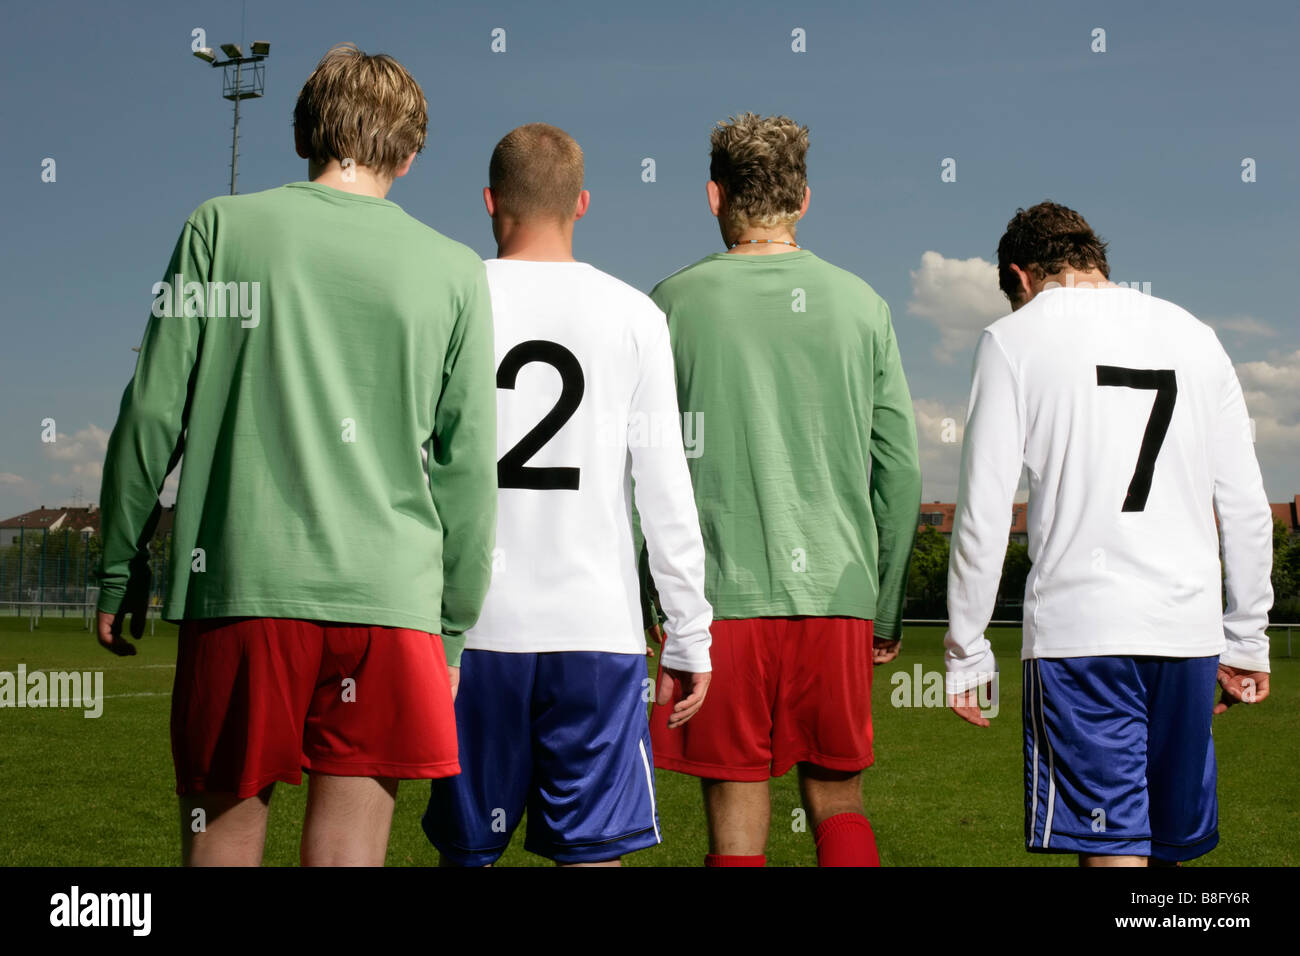 Four footballers of adverse teams standing next to each other, rear view Stock Photo